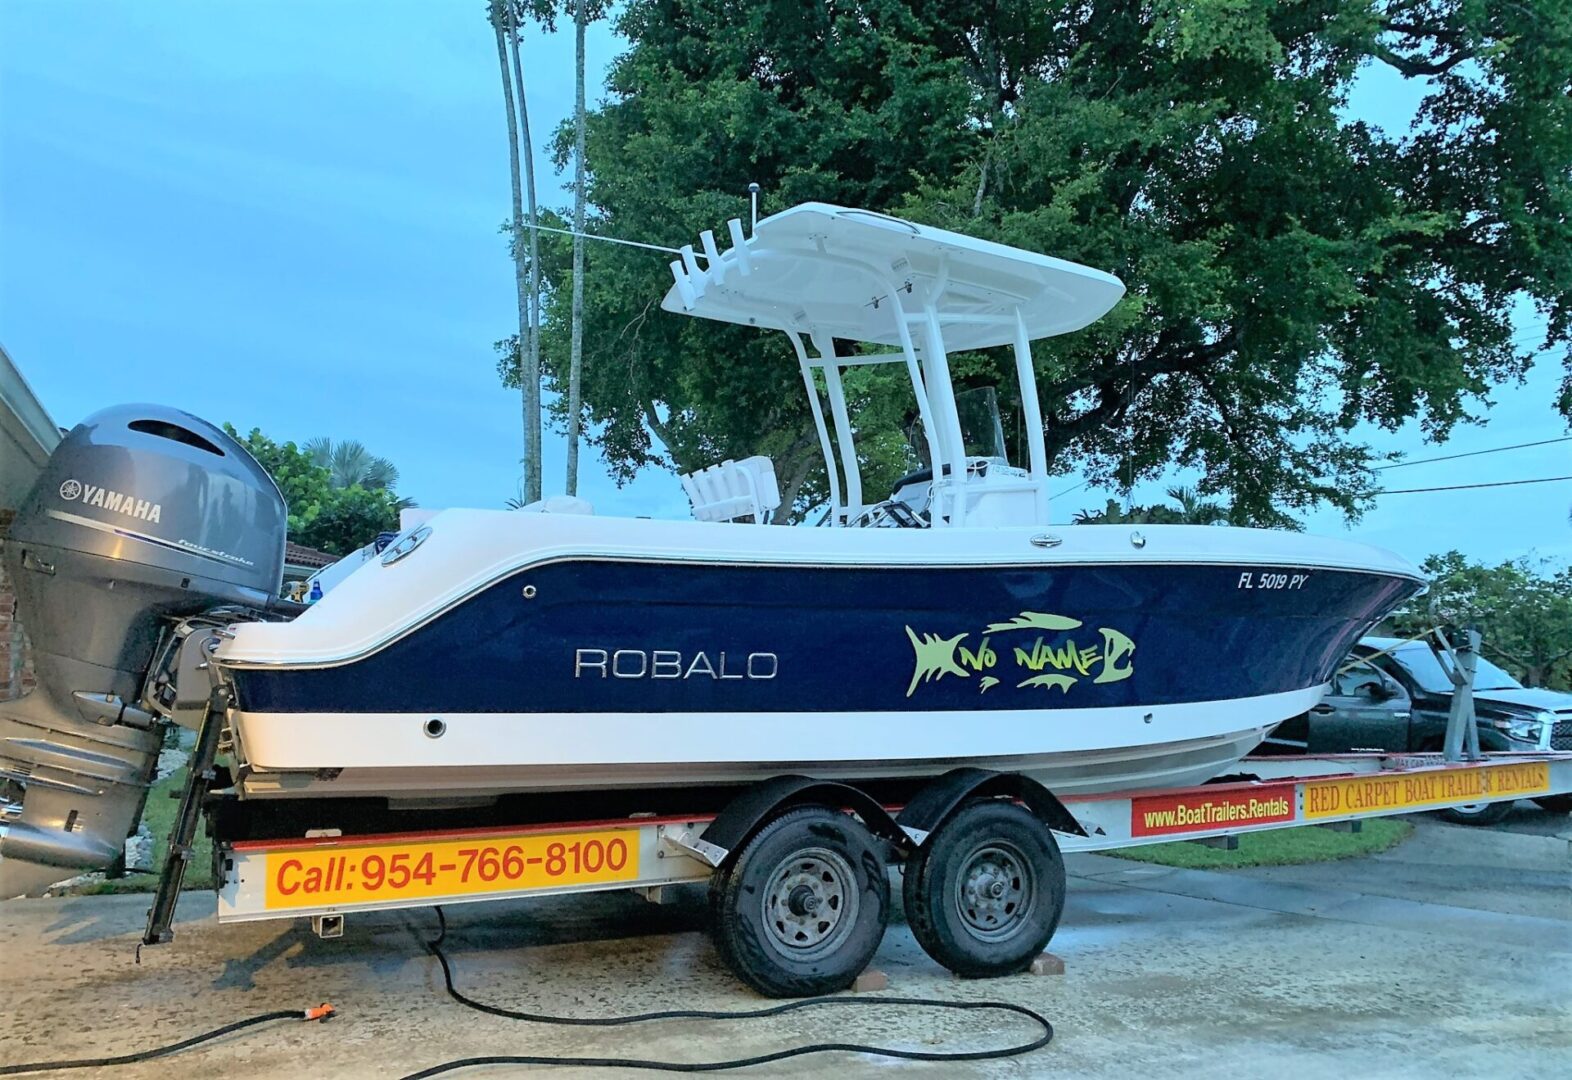 Picture of a new blue and white Robalo